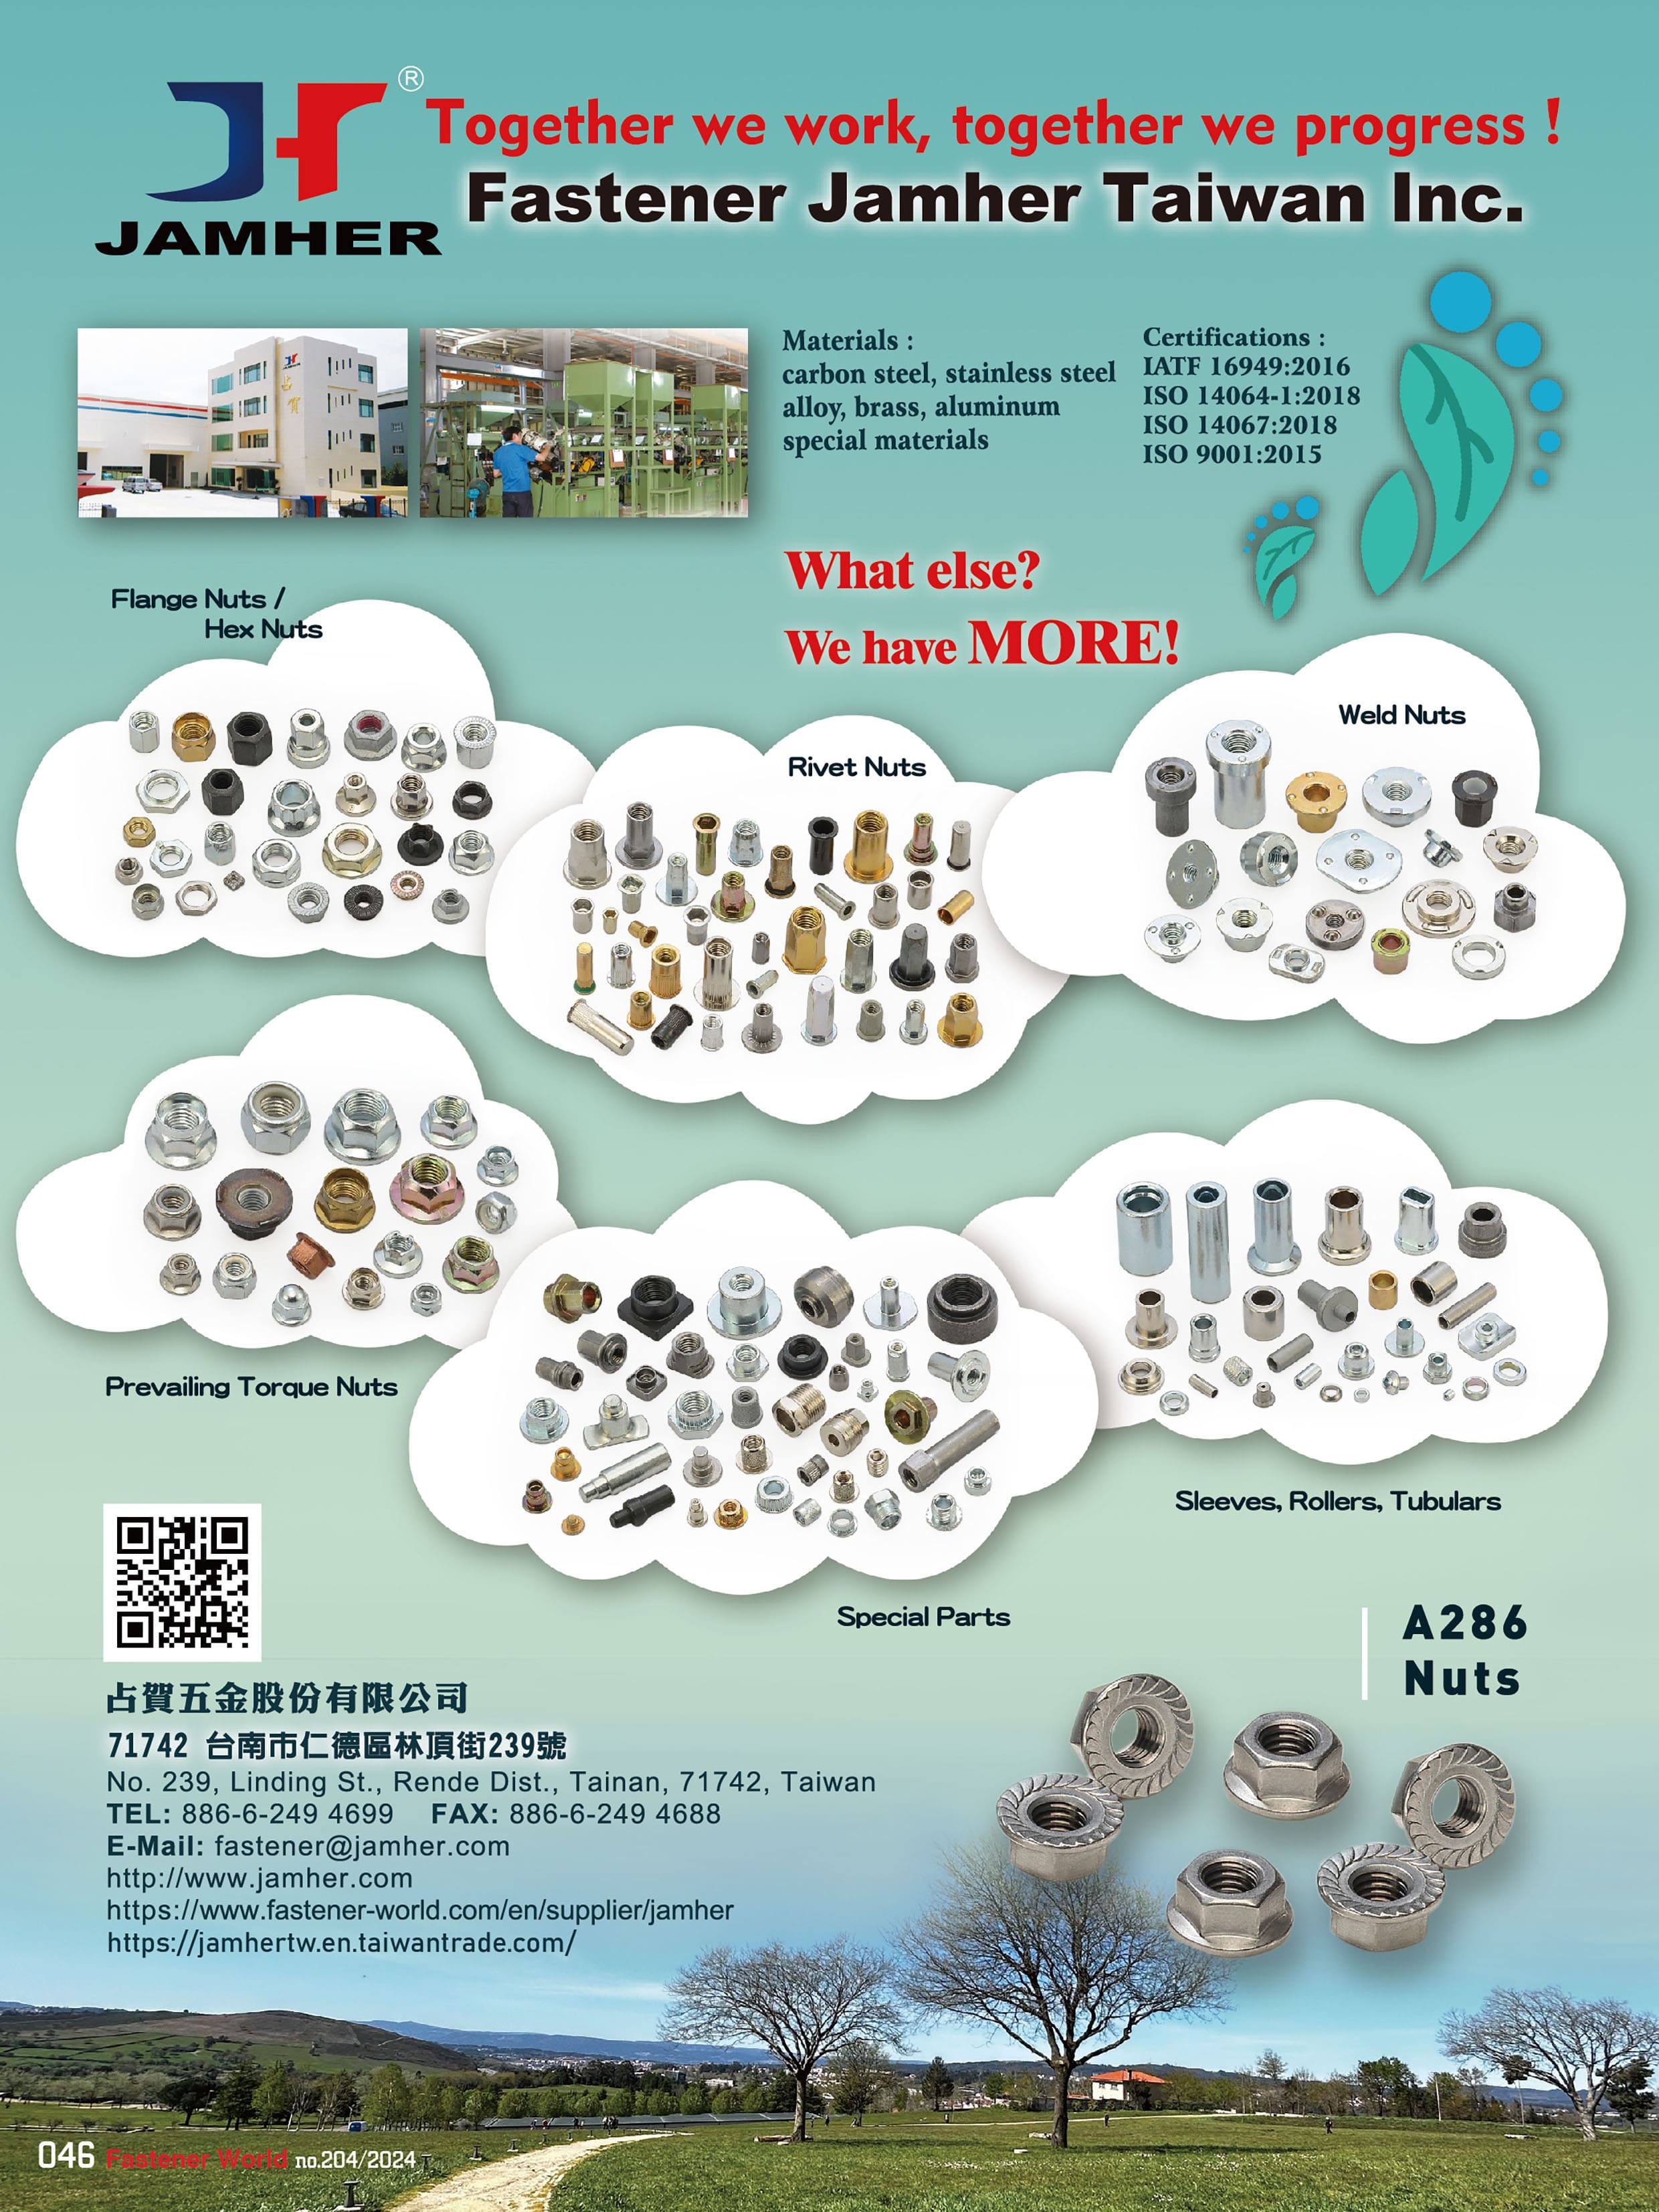 FASTENER JAMHER TAIWAN INC.  , Flange Nuts / Hex Nuts, Rivet Nuts, Weld Nuts, Prevailing Torque Nuts, Special Parts, Sleeve, Rollers, Tubulars